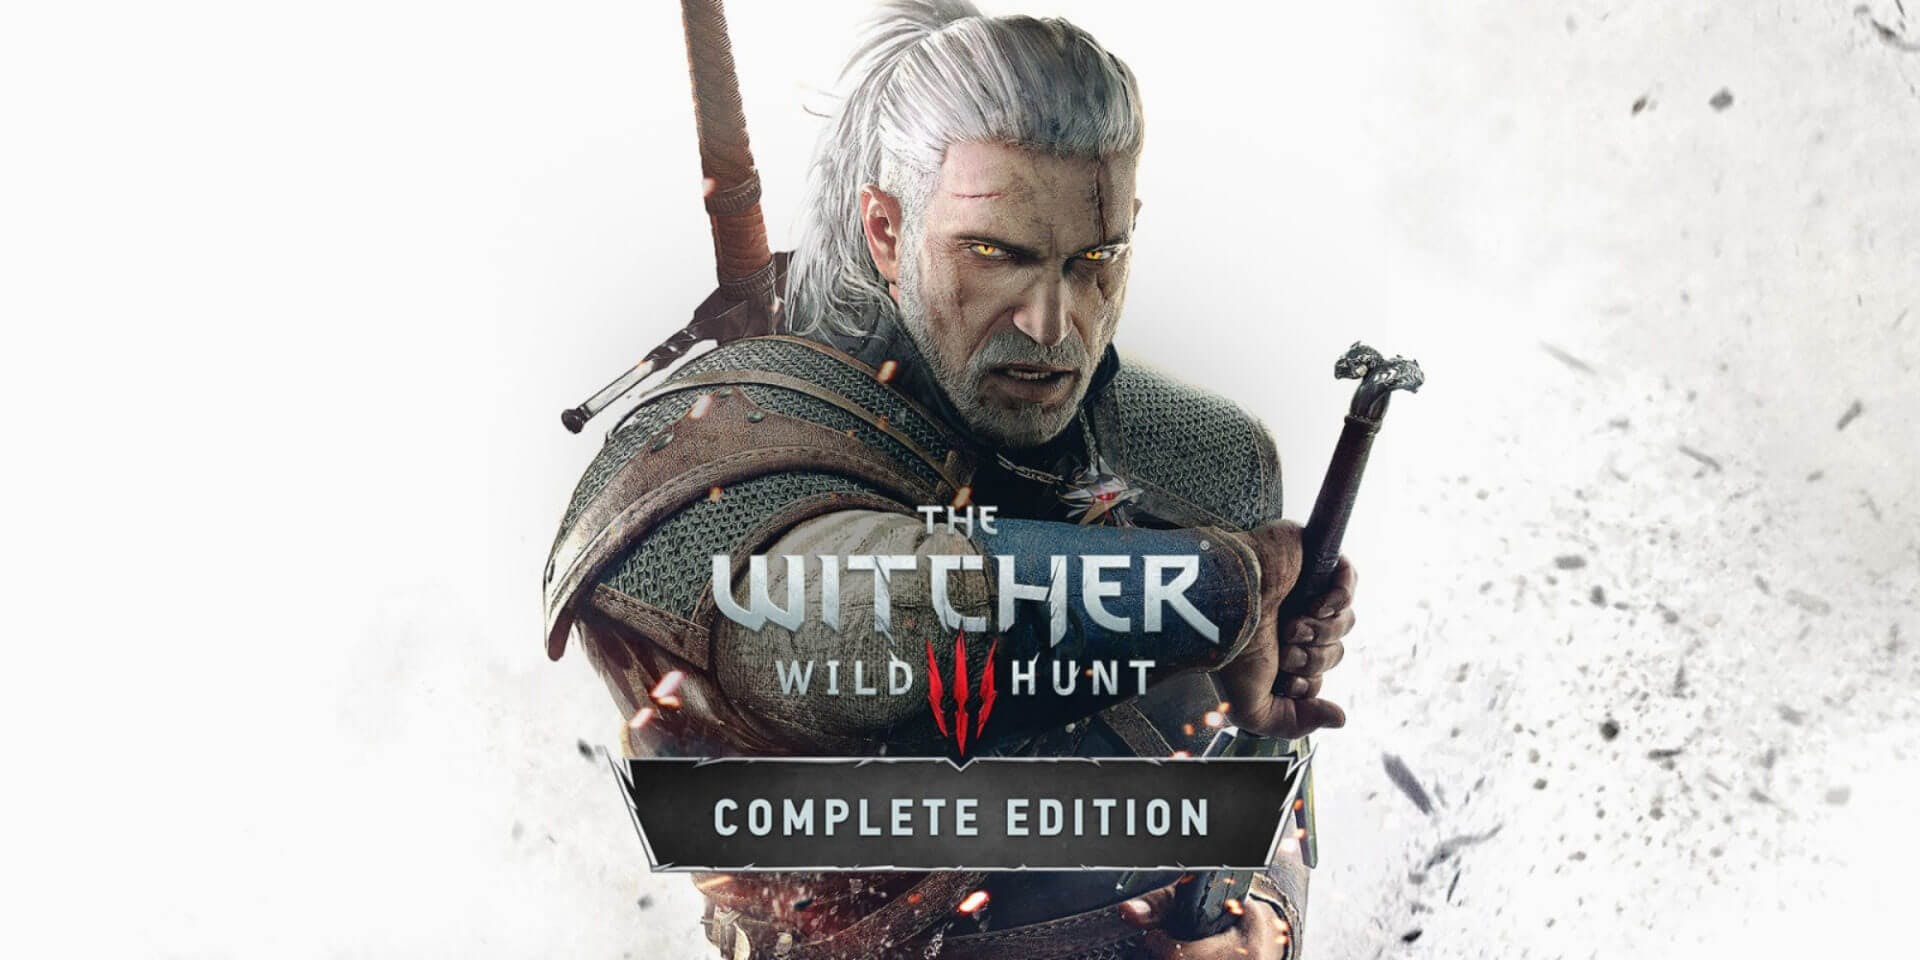 upcoming video games october 2019 the witcher 3 wild hunt complete edition